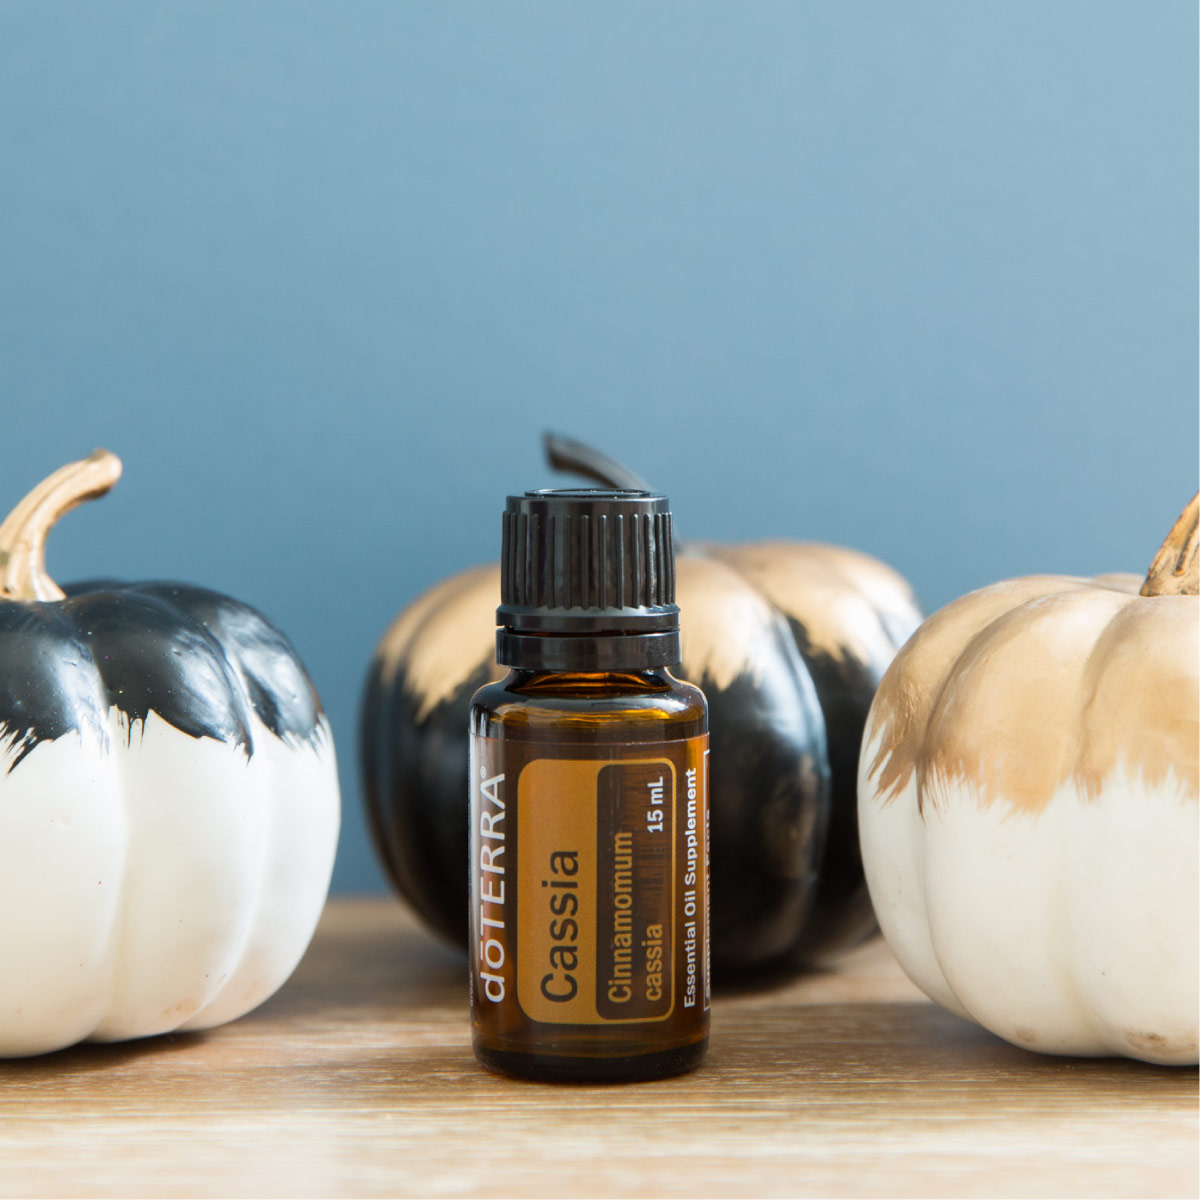 Bottle of Cassia oil next to festive painted pumpkins. What does Cassia oil smell like? Some people wonder if cassia and cinnamon are the same. While similar to cinnamon, Cassia essential oil has its own unique aroma that is warm, spicy, and potent.